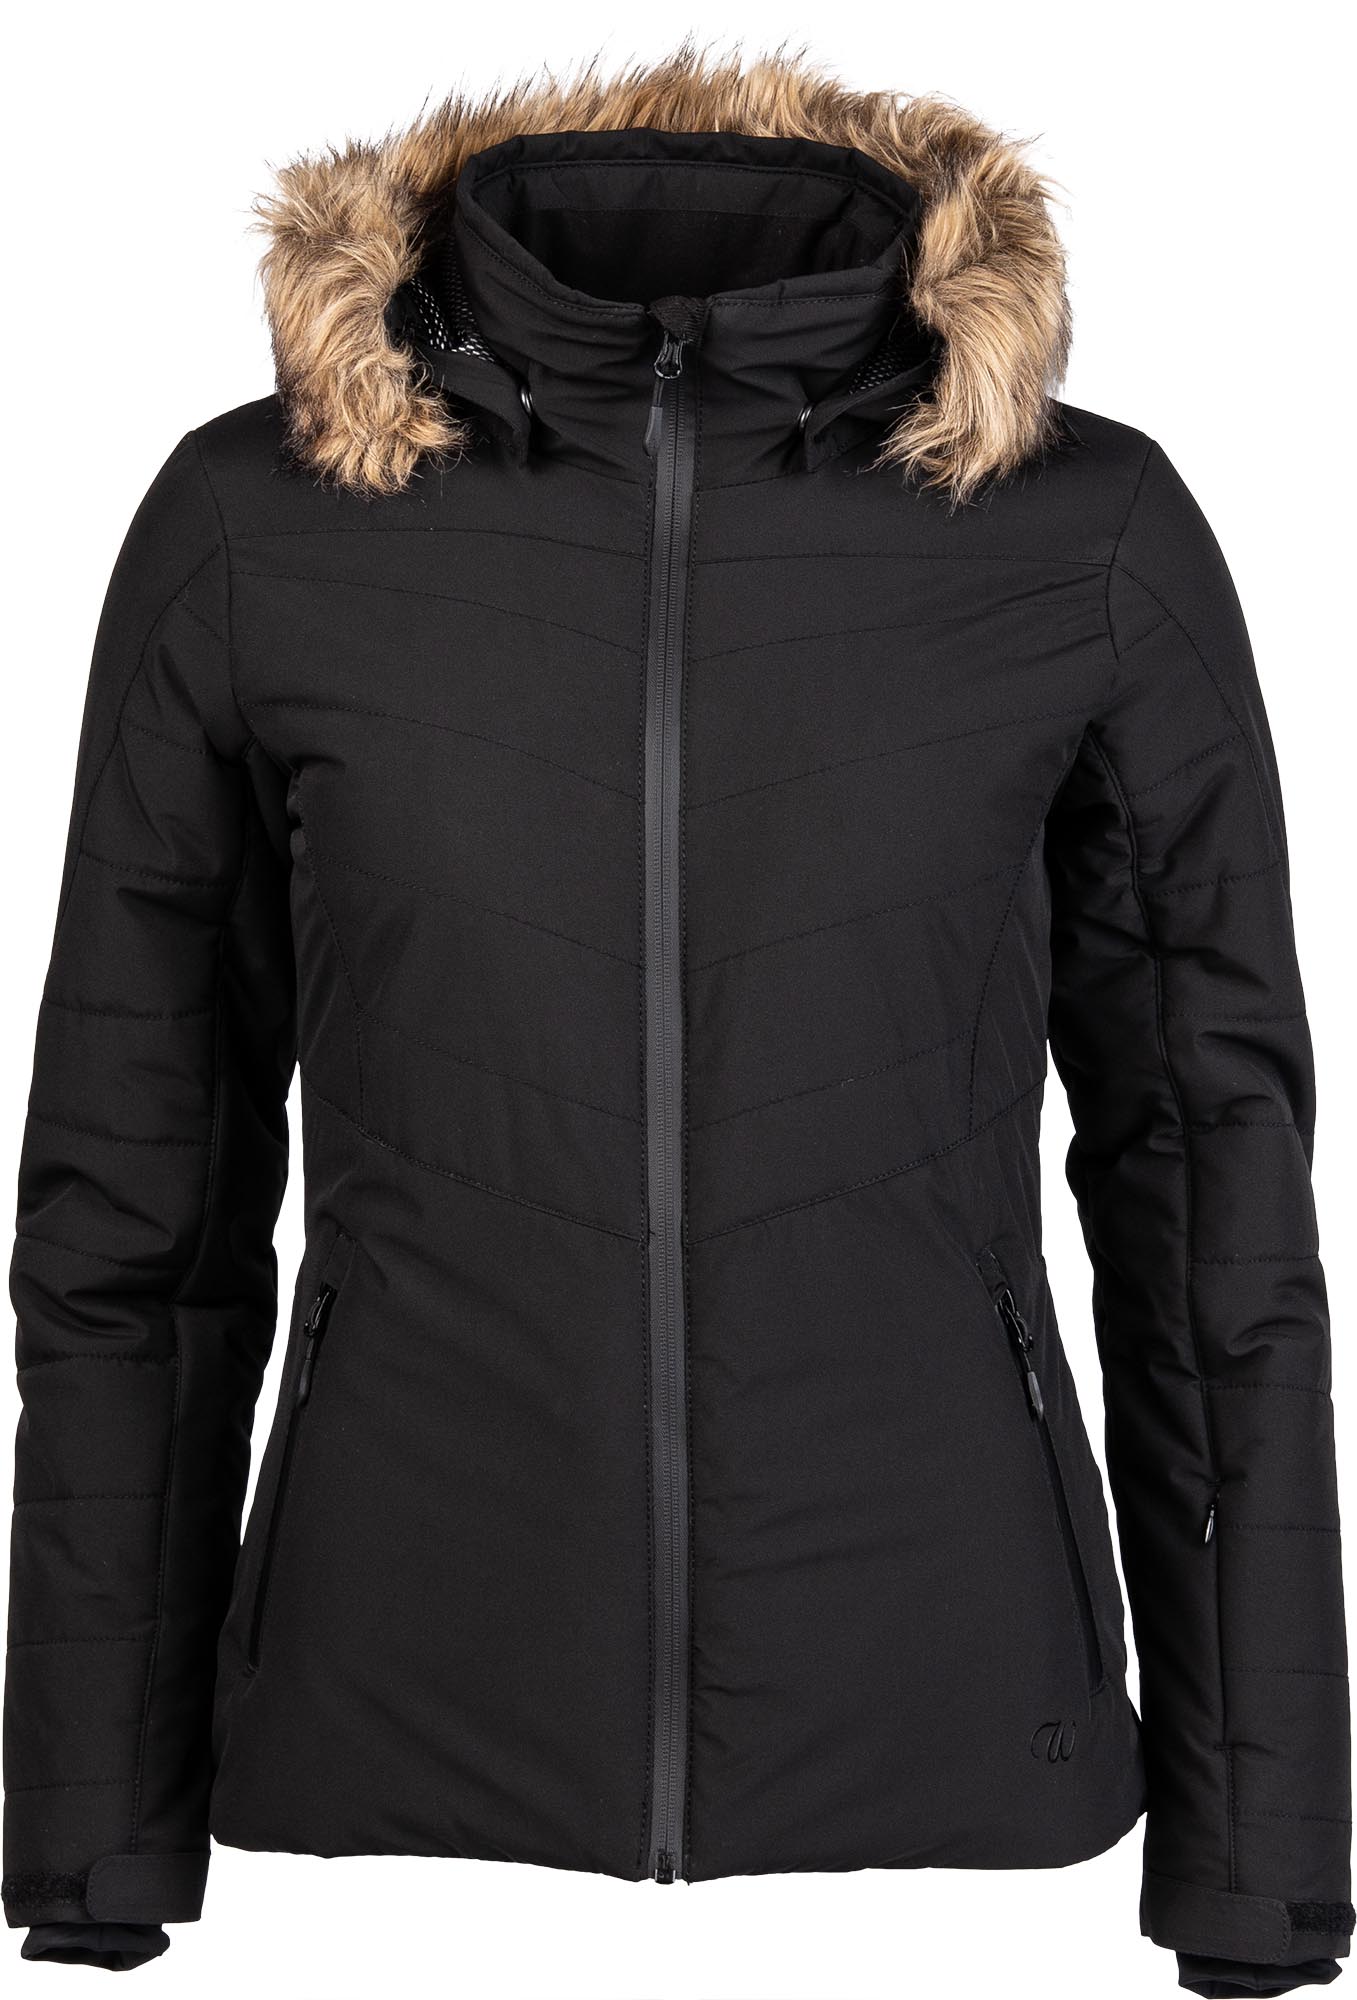 Women’s quilted ski jacket